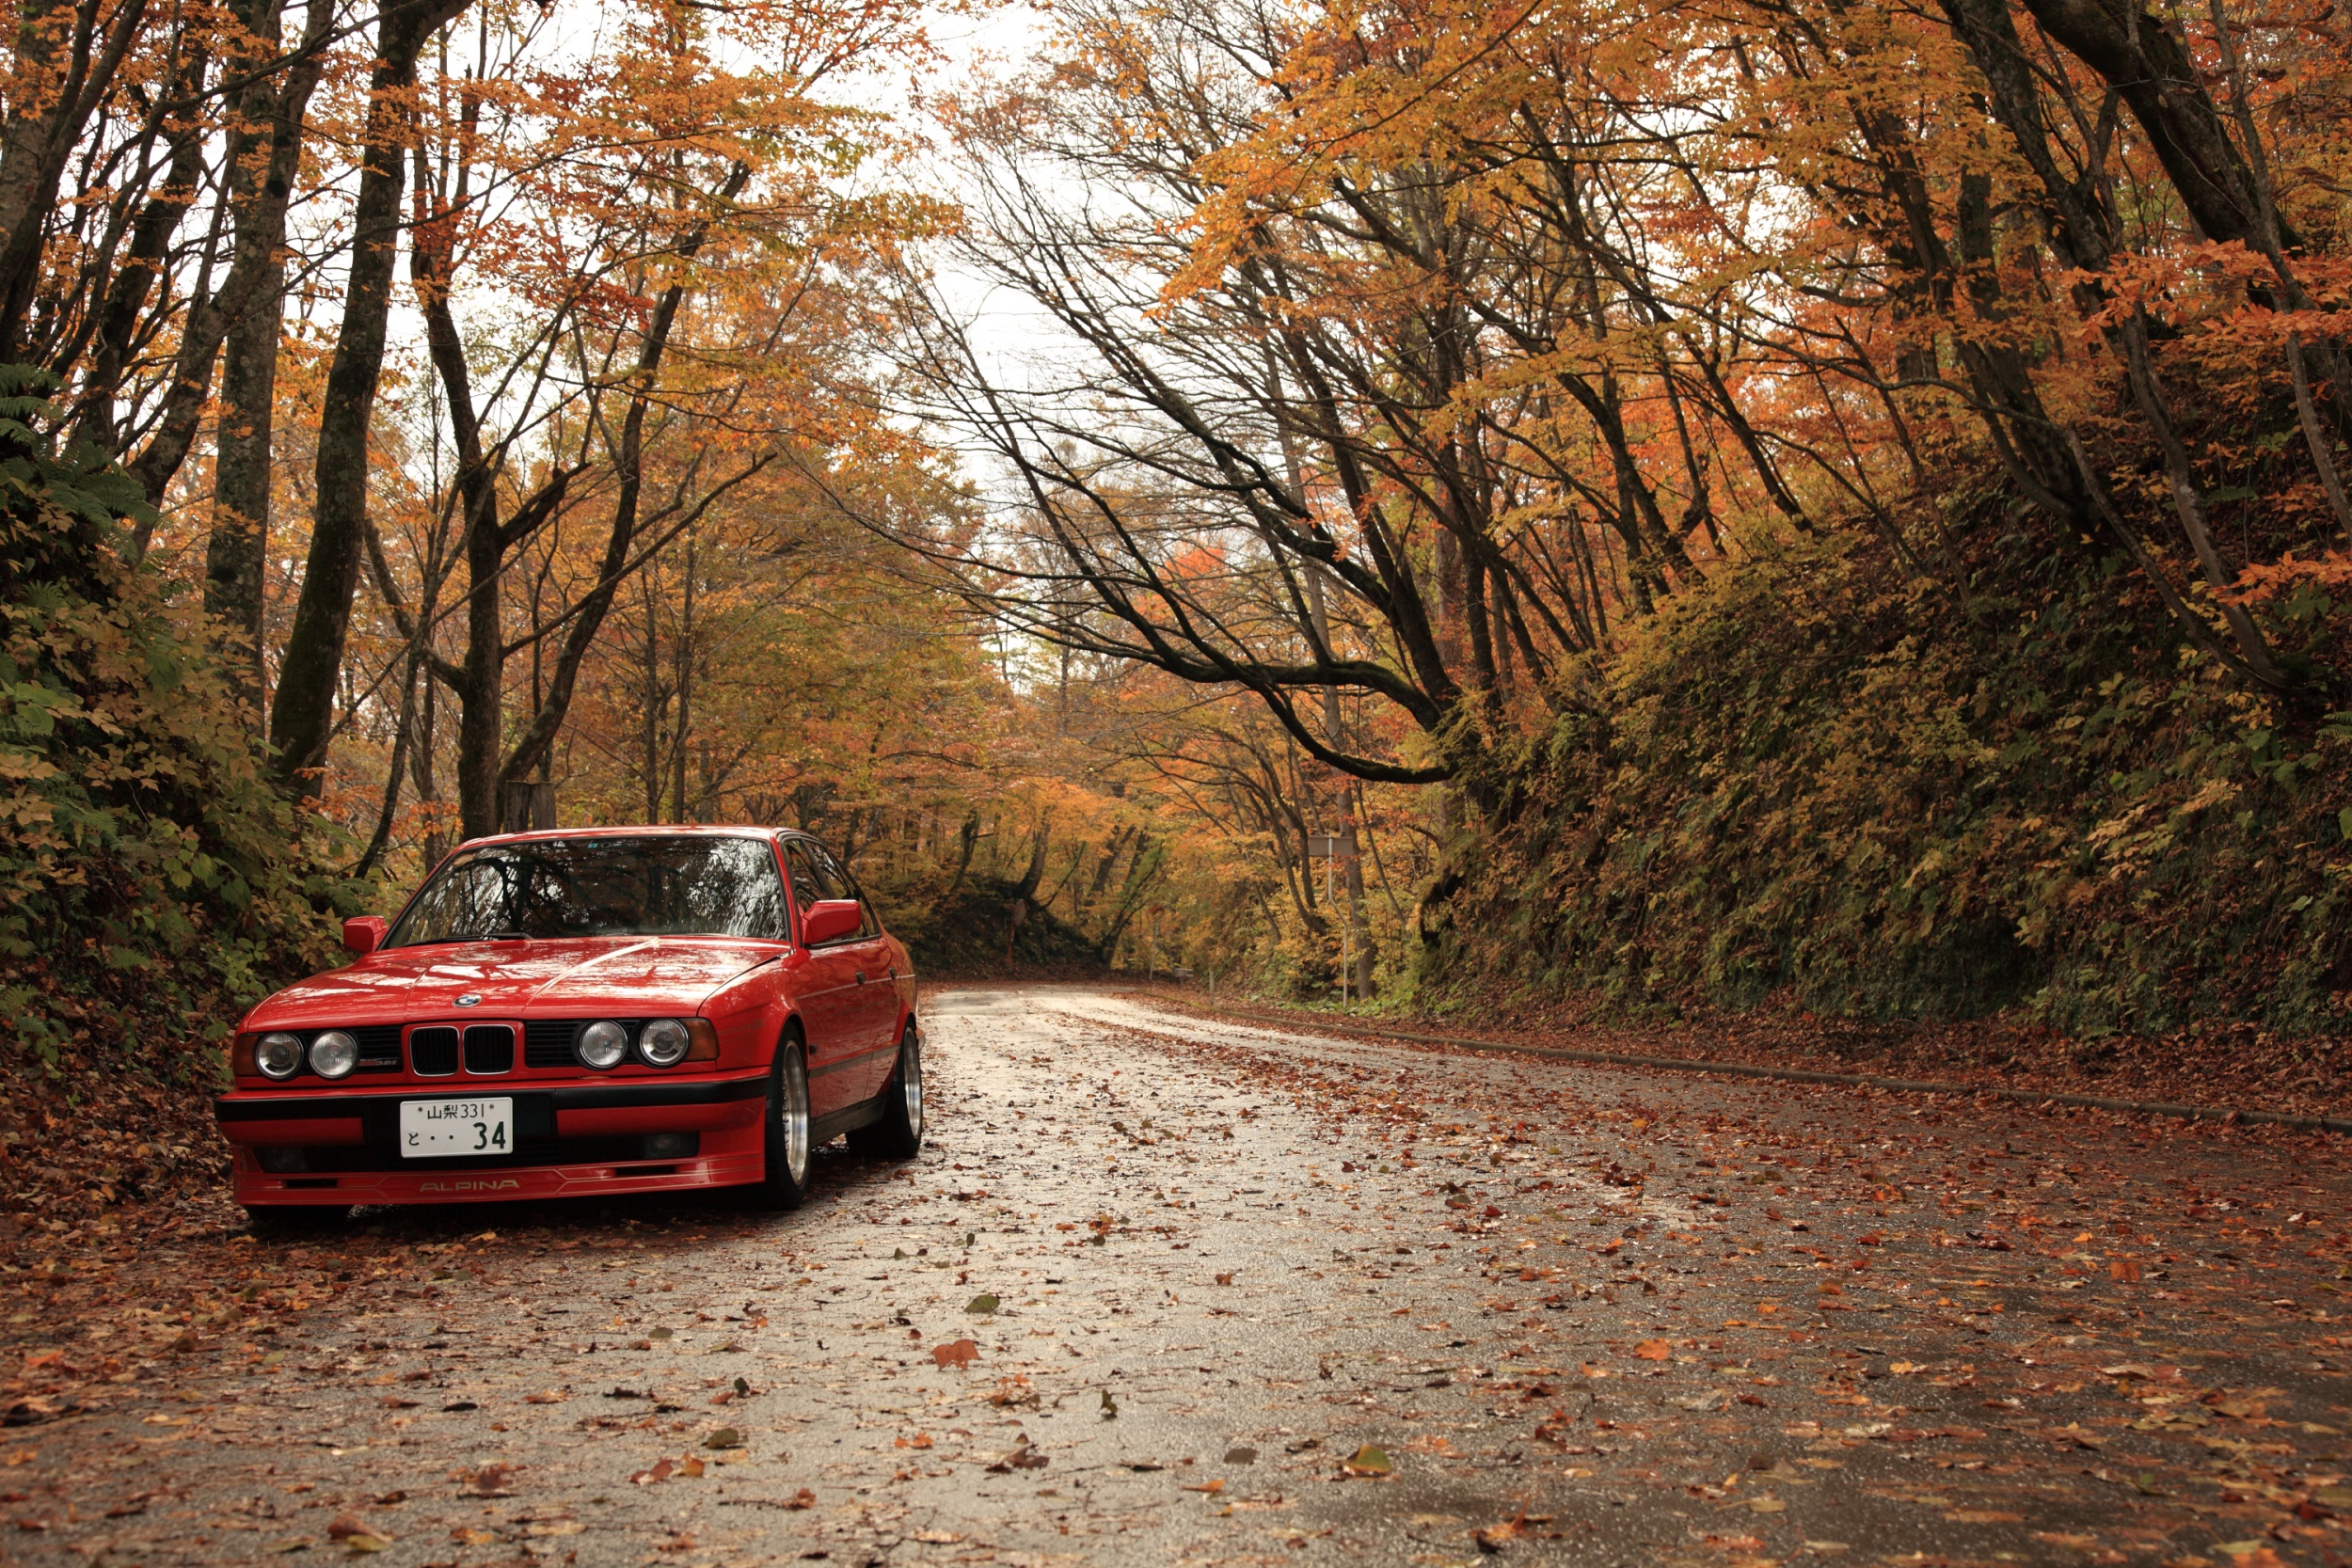 Wallpaper, BMW, fall, car, road, vehicle, red cars, trees 2500x1667